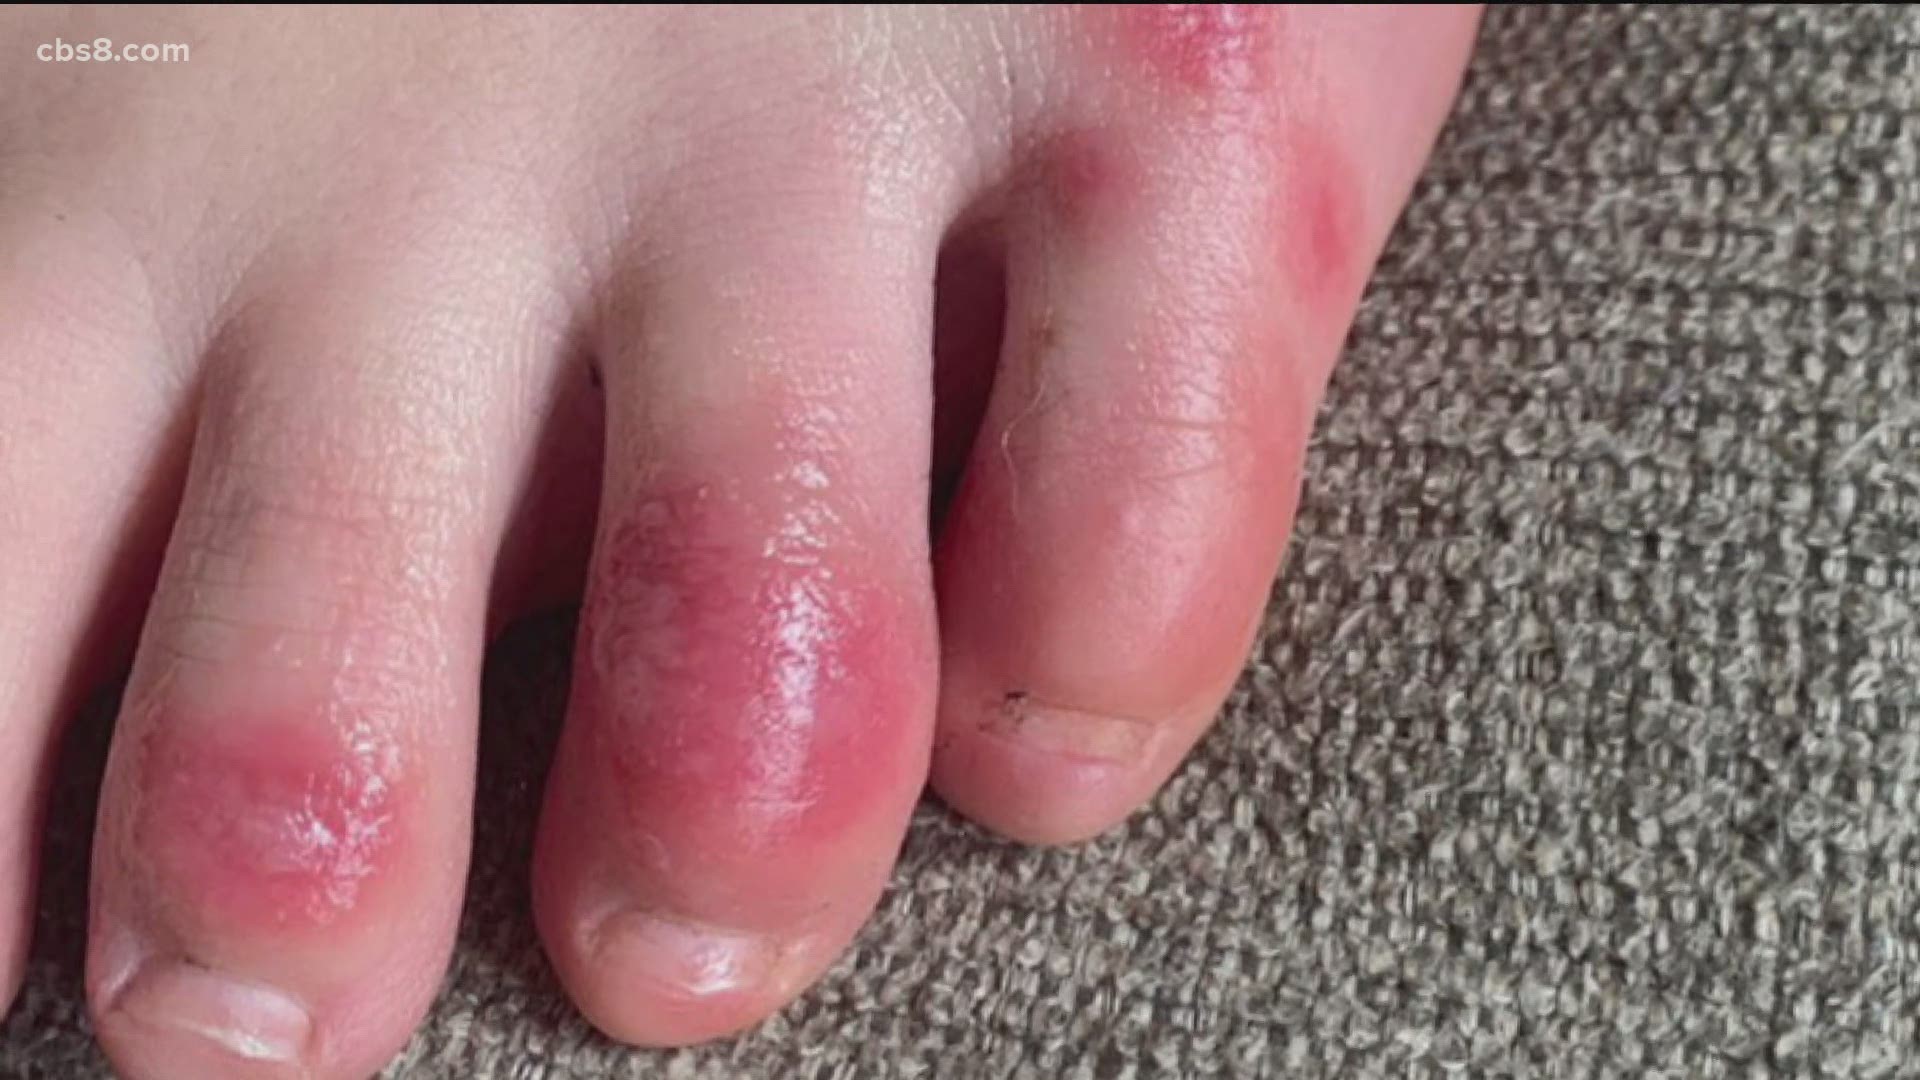 Skin doctors say coronavirus symptoms are popping up in unusual places like toes.